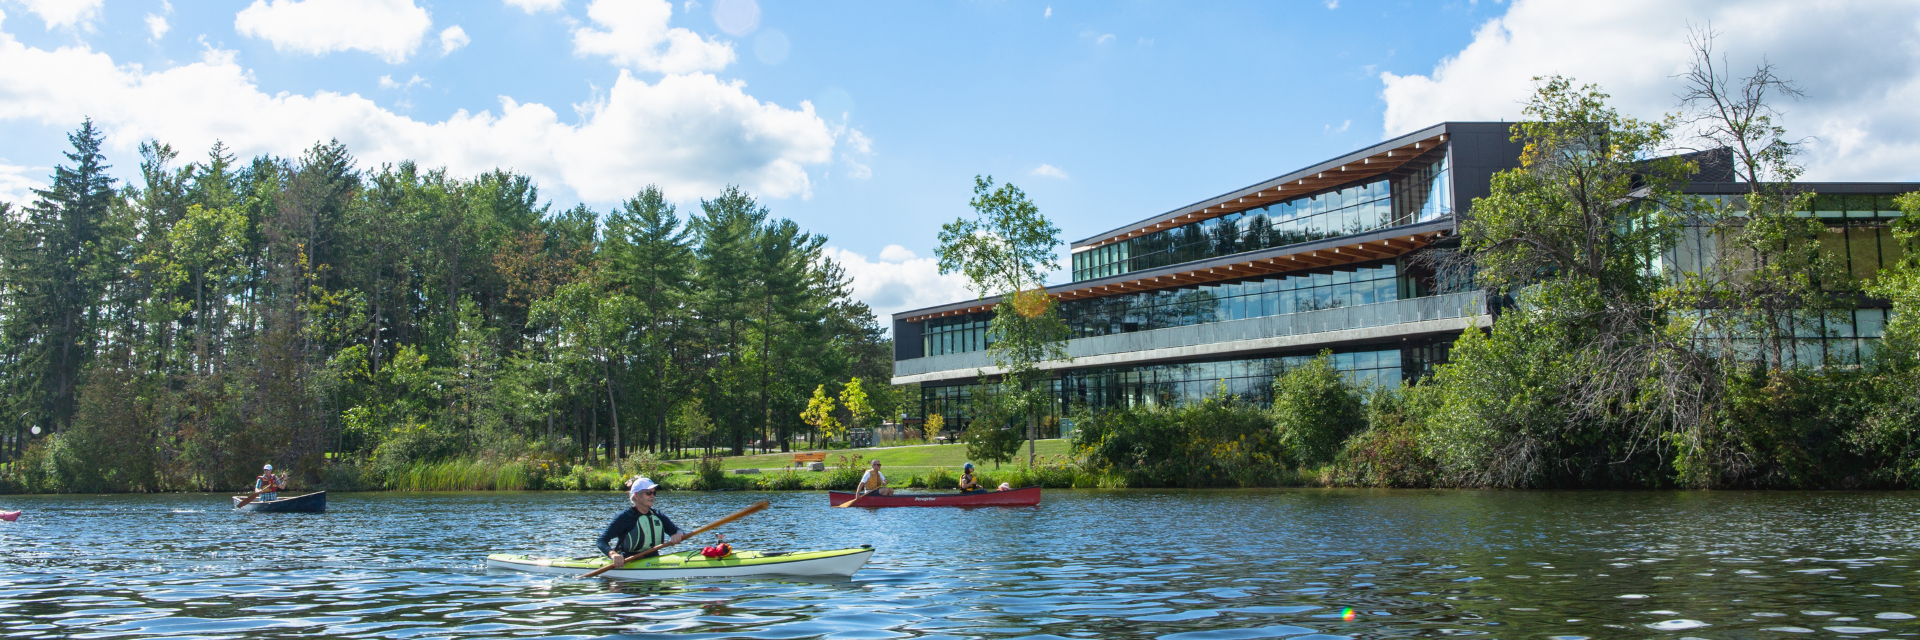 People in kayaks and canoes in the Otonabee river by the student centre